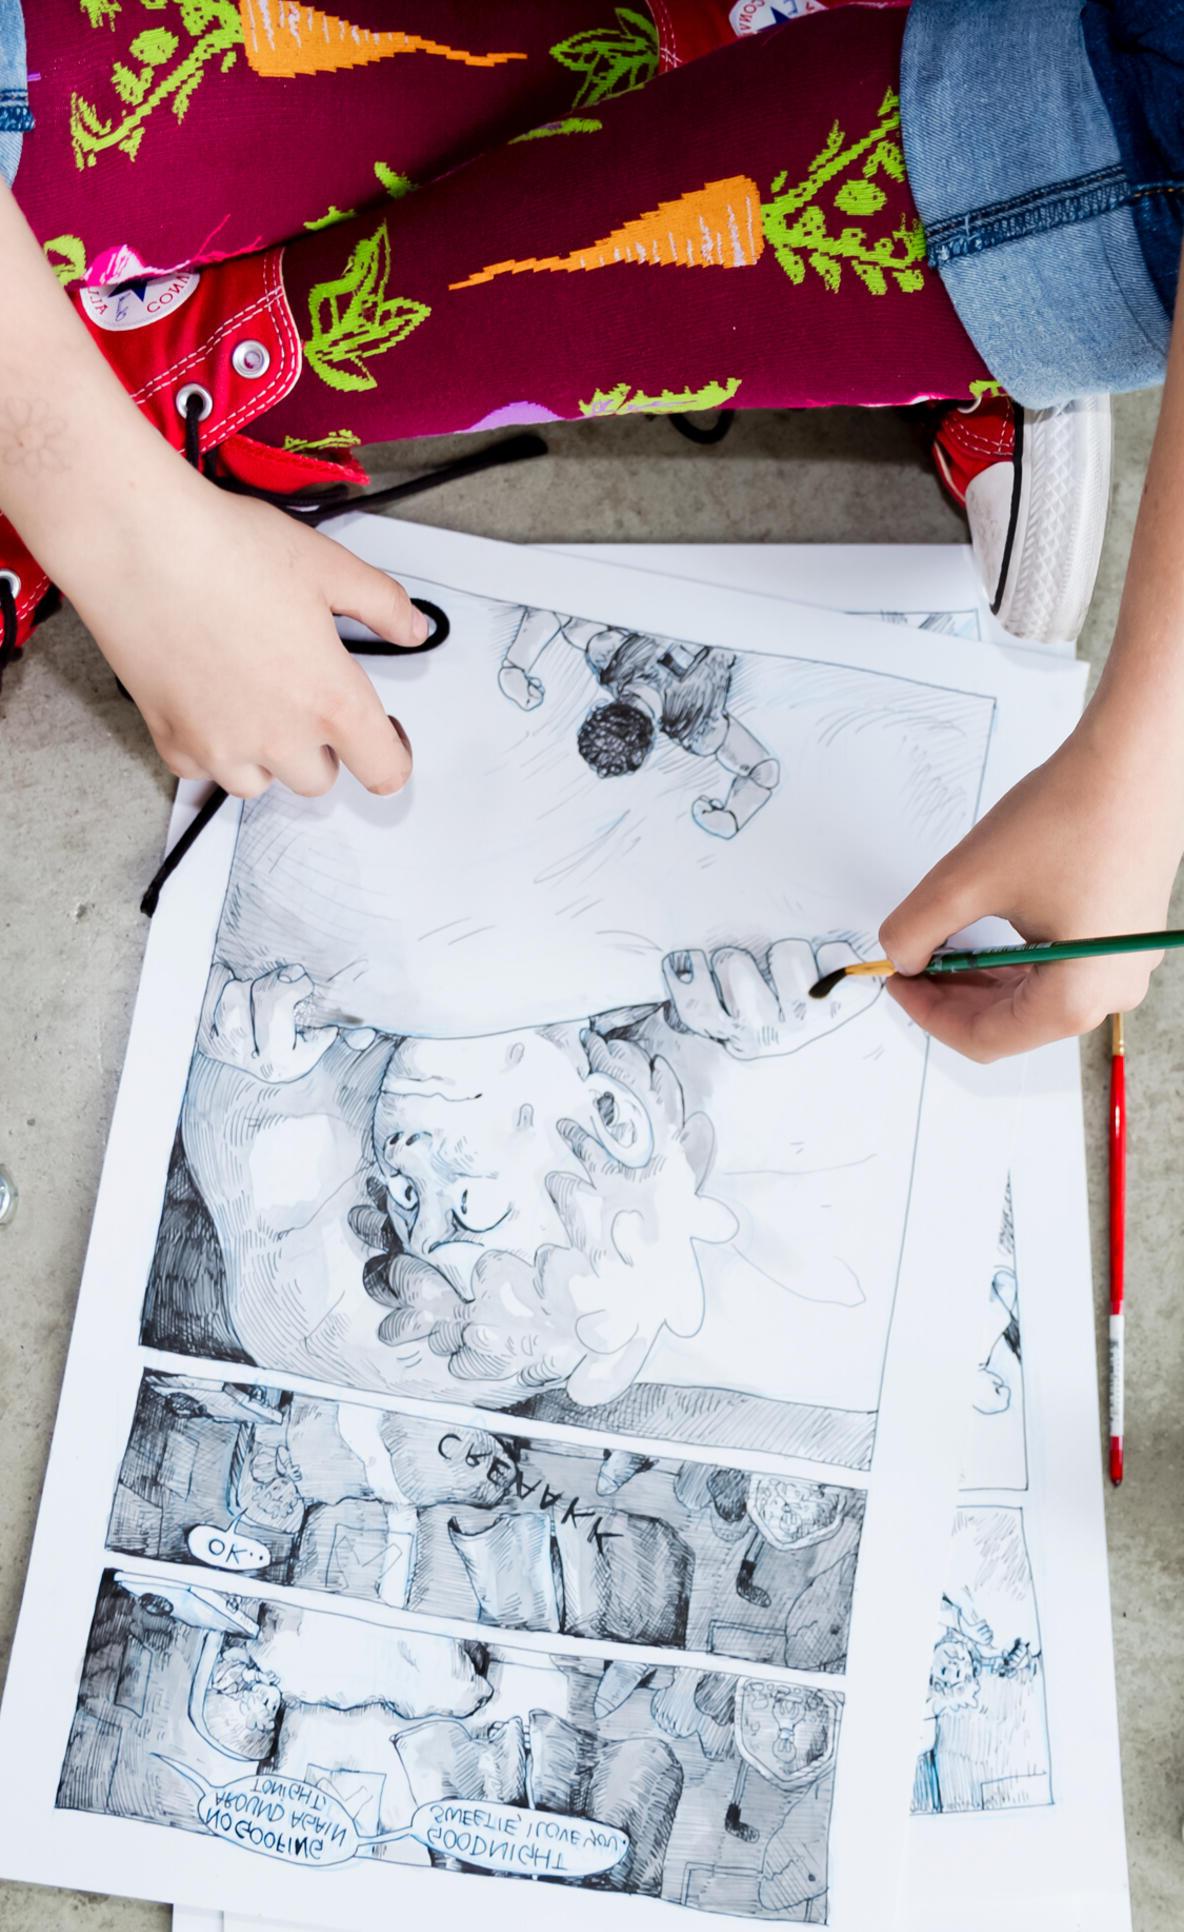 Overview shot of a student painting a comic